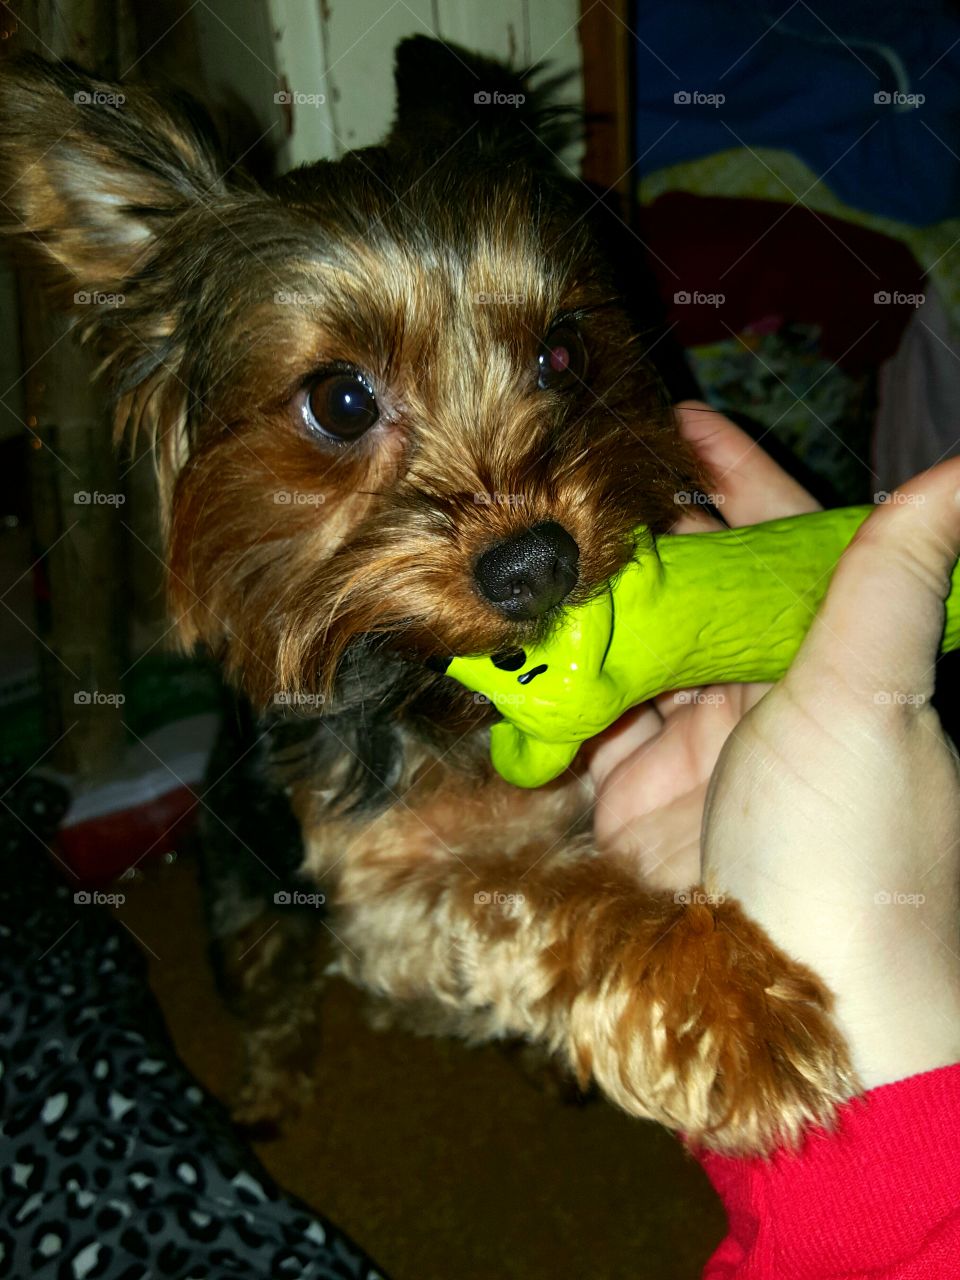 Parker really doesn't want to give up his toy!